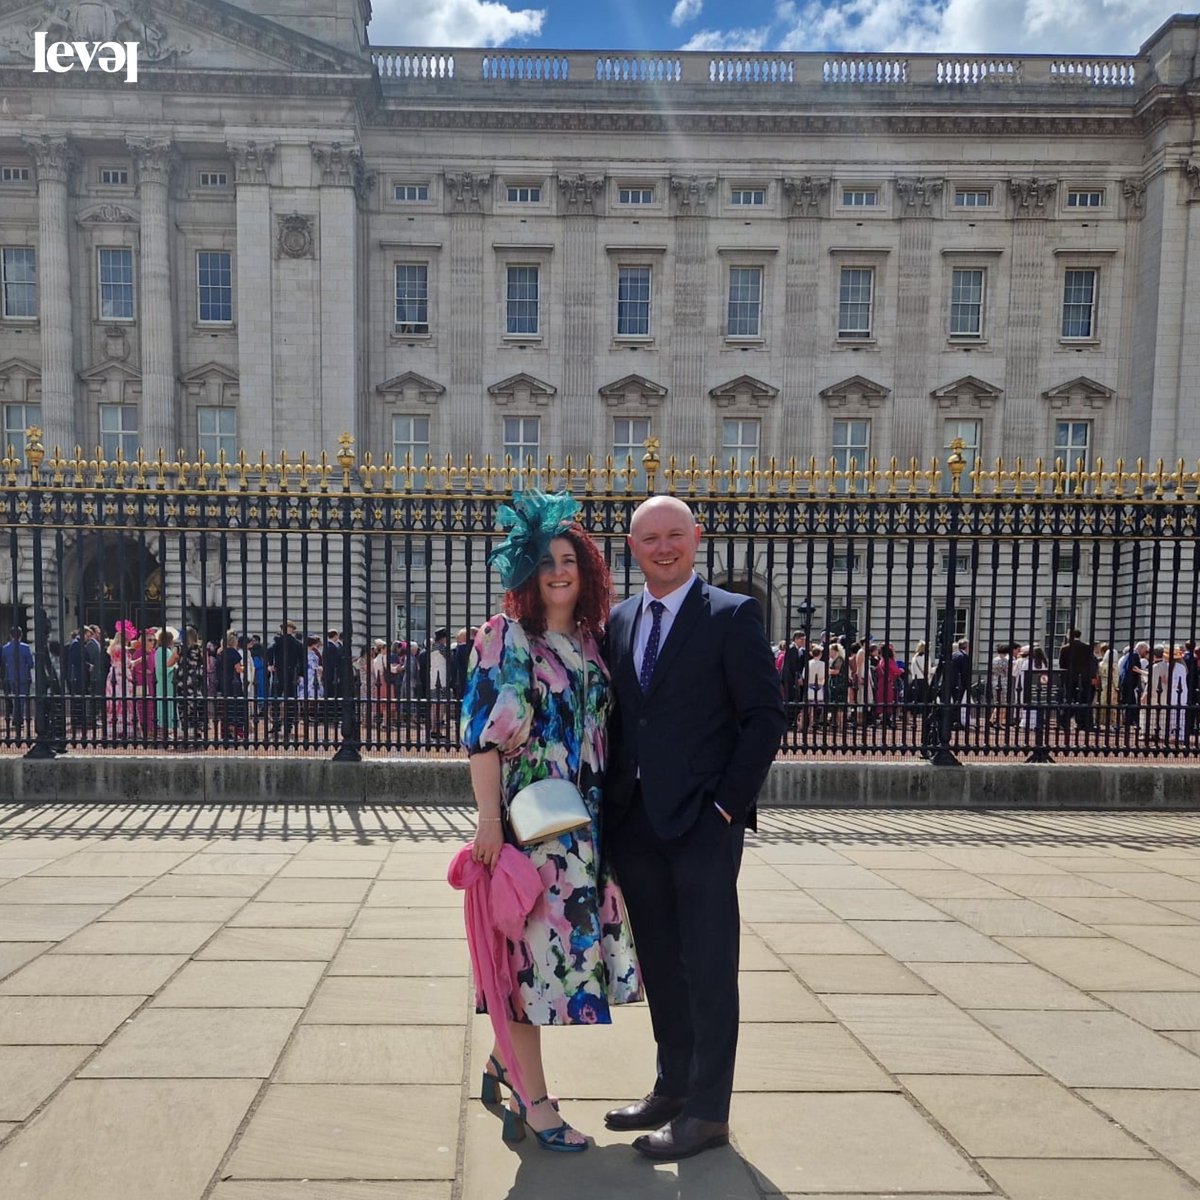 What an amazing day for LEVEL on Wednesday as our Executive and Artistic director Kerry & Chair of the Board Stuart were invited to the Creative Industries Garden Part at the one and only Buckingham Palace! @DCMS @ace_national #LEVEL #LevelCentre #BuckinghamPalace #GardenParty